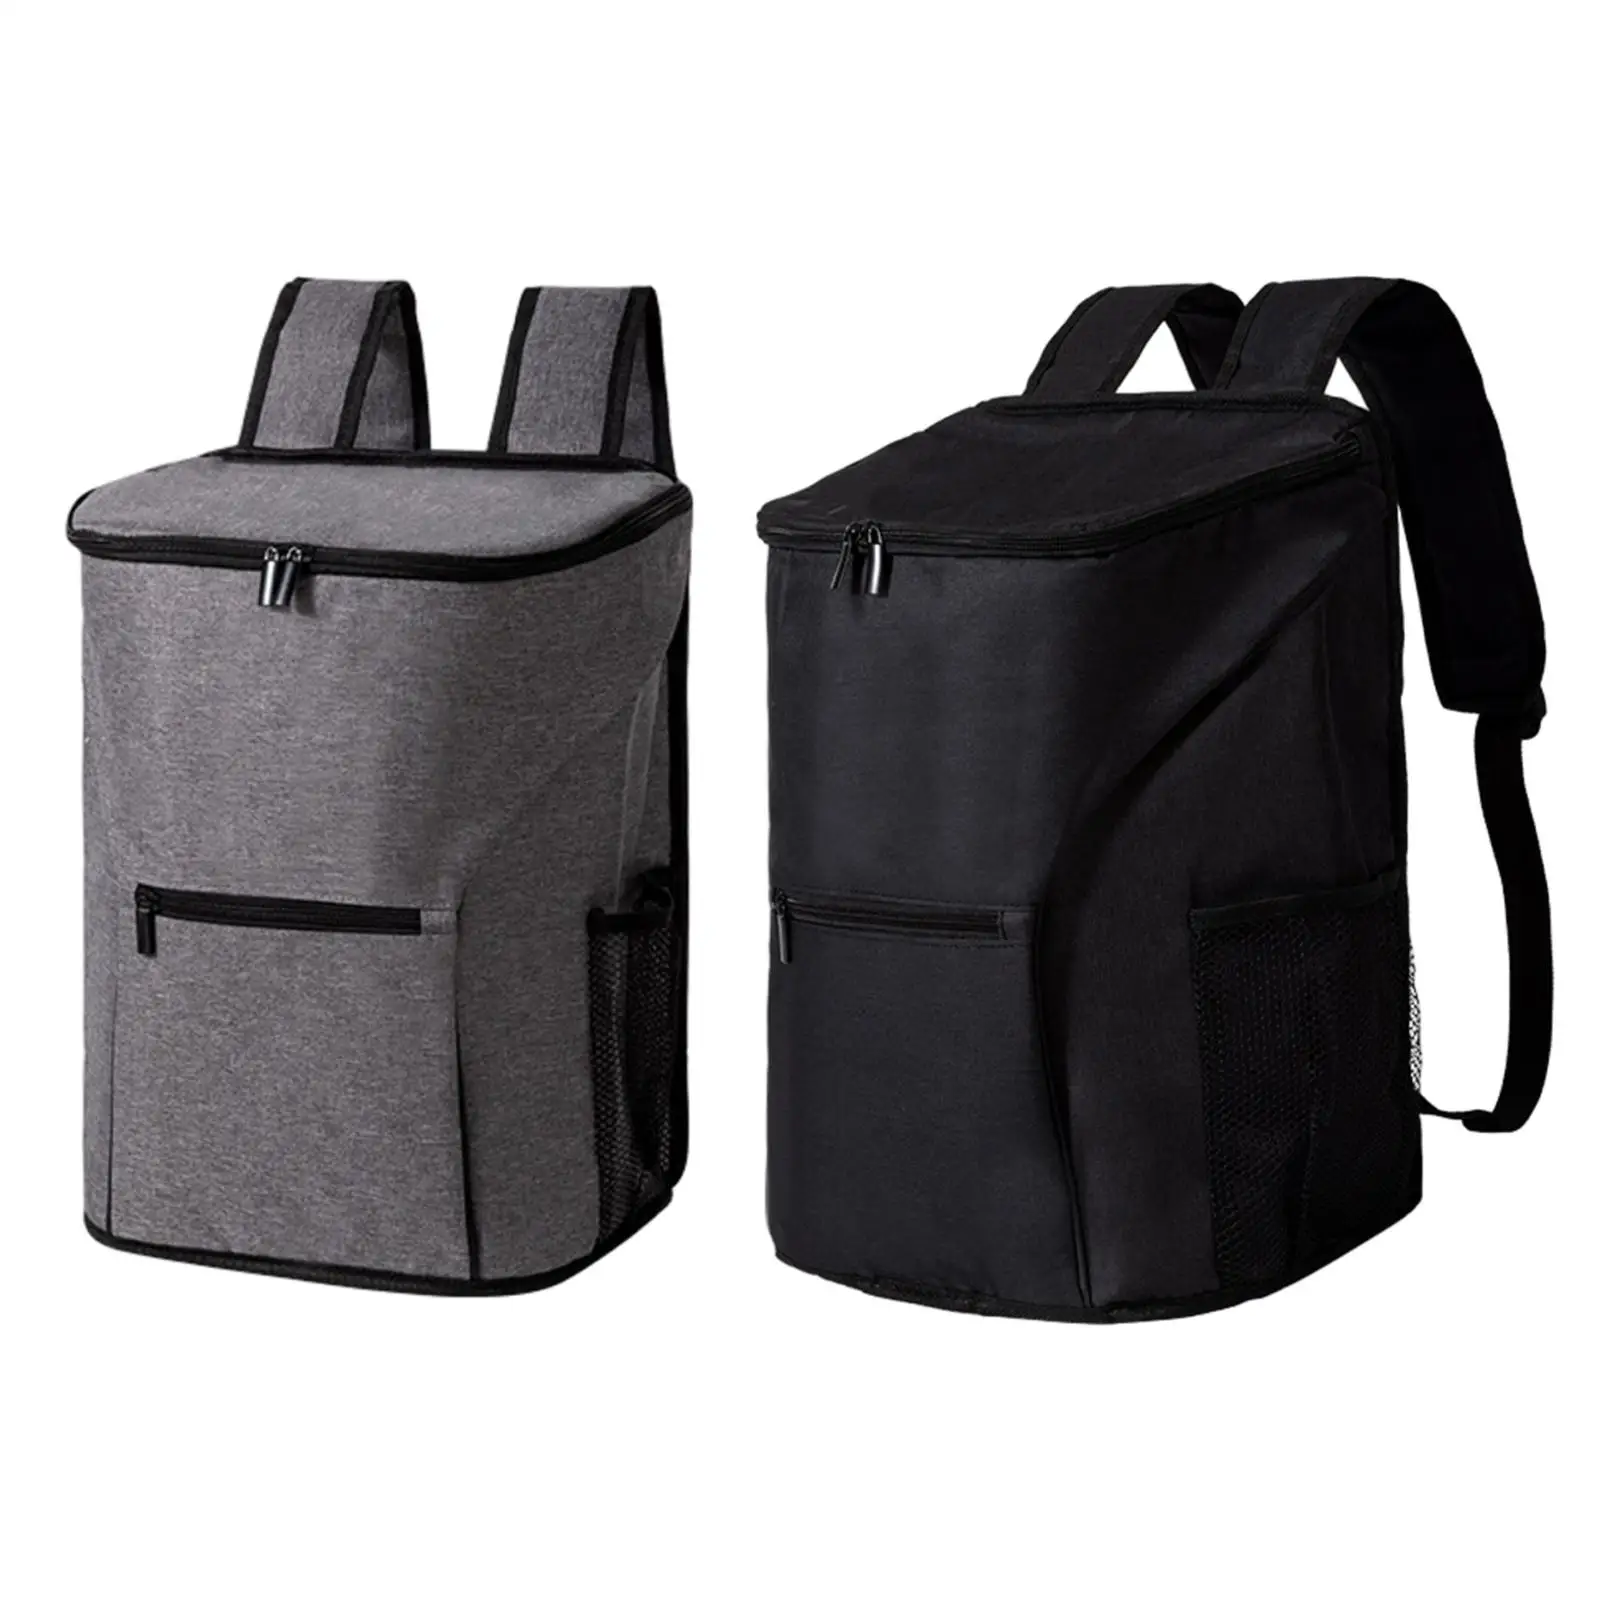 Cooler Bag Portable Leakproof Thermal Backpack Lunch Backpack Waterproof Beach Cooler for Travel Camping Work Picnic Hiking